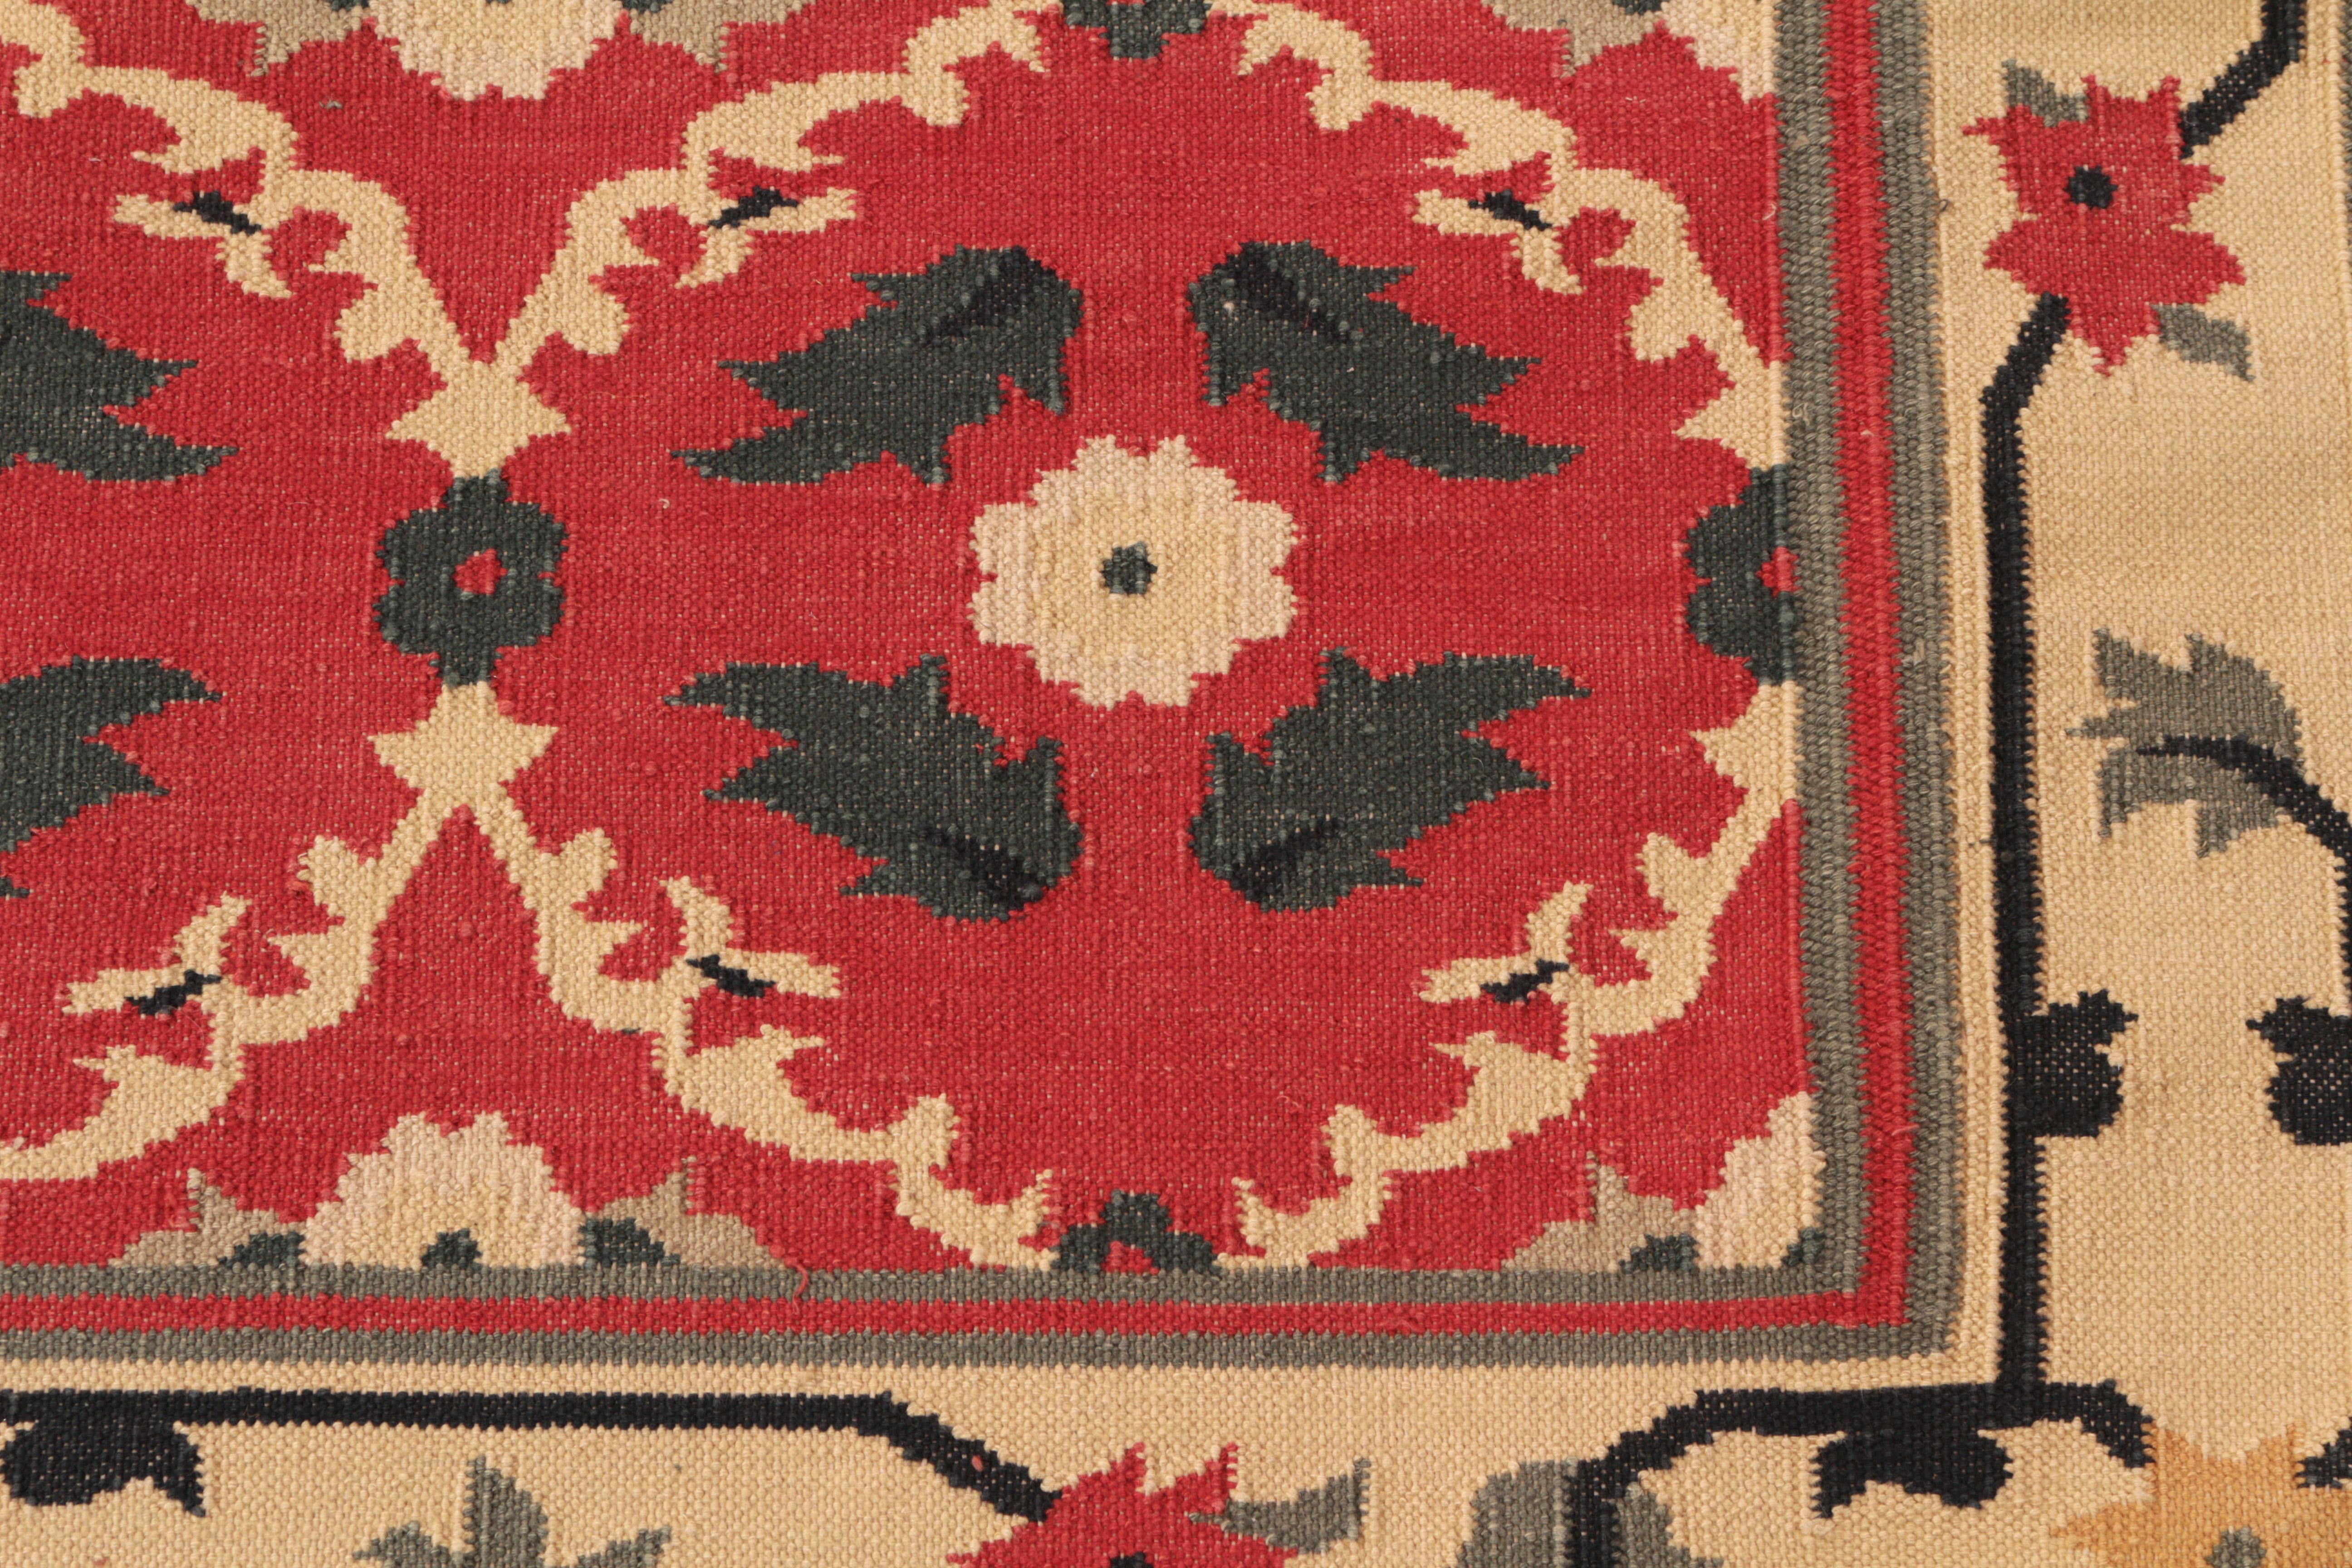 Hand-Woven Rug & Kilim's Vintage Dhurrie Style Rug Red and Beige Floral Pattern